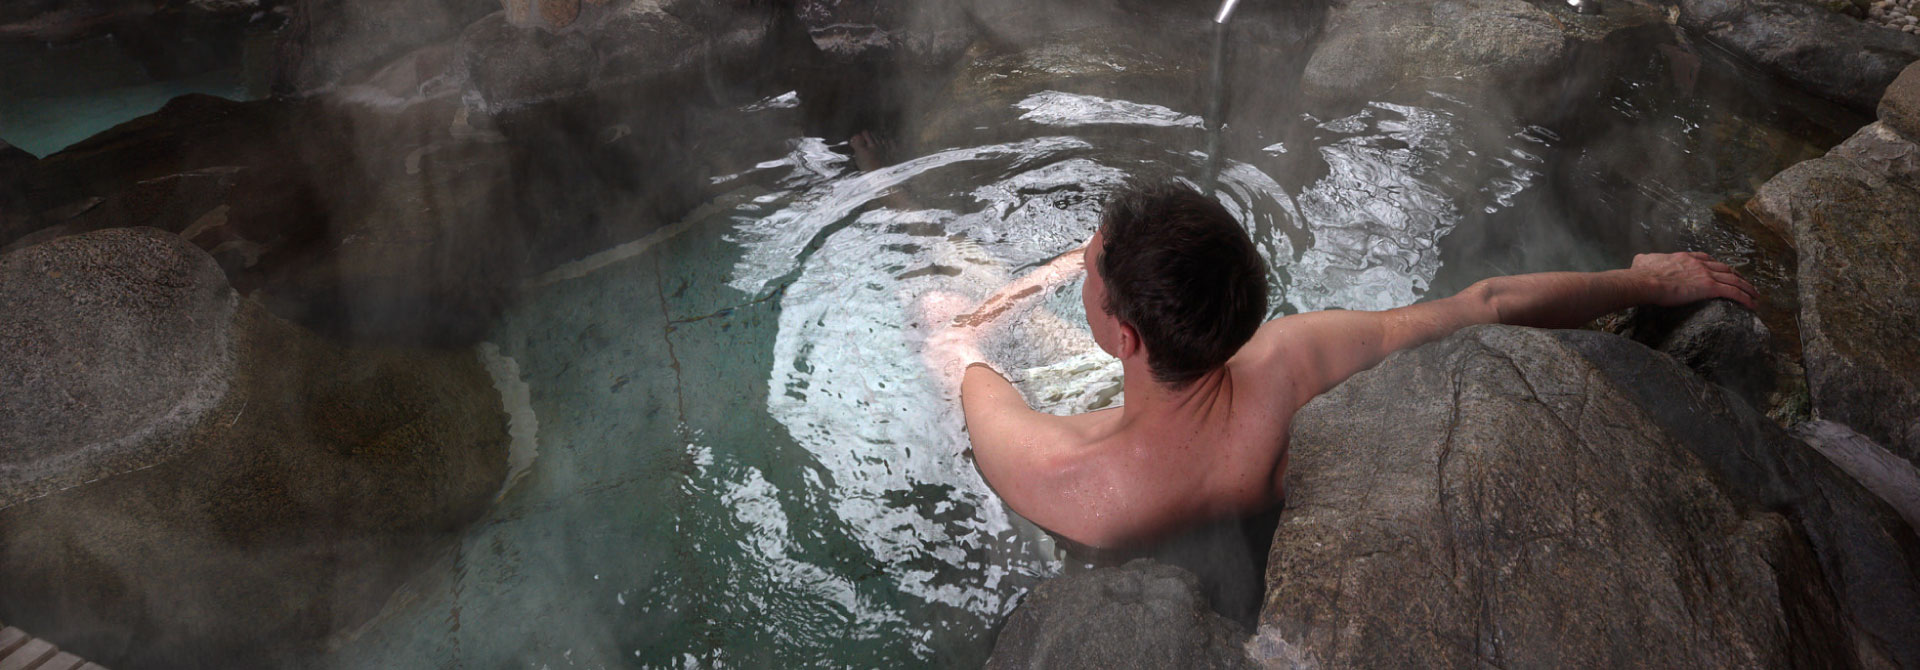 Onsen hot spring in the nature